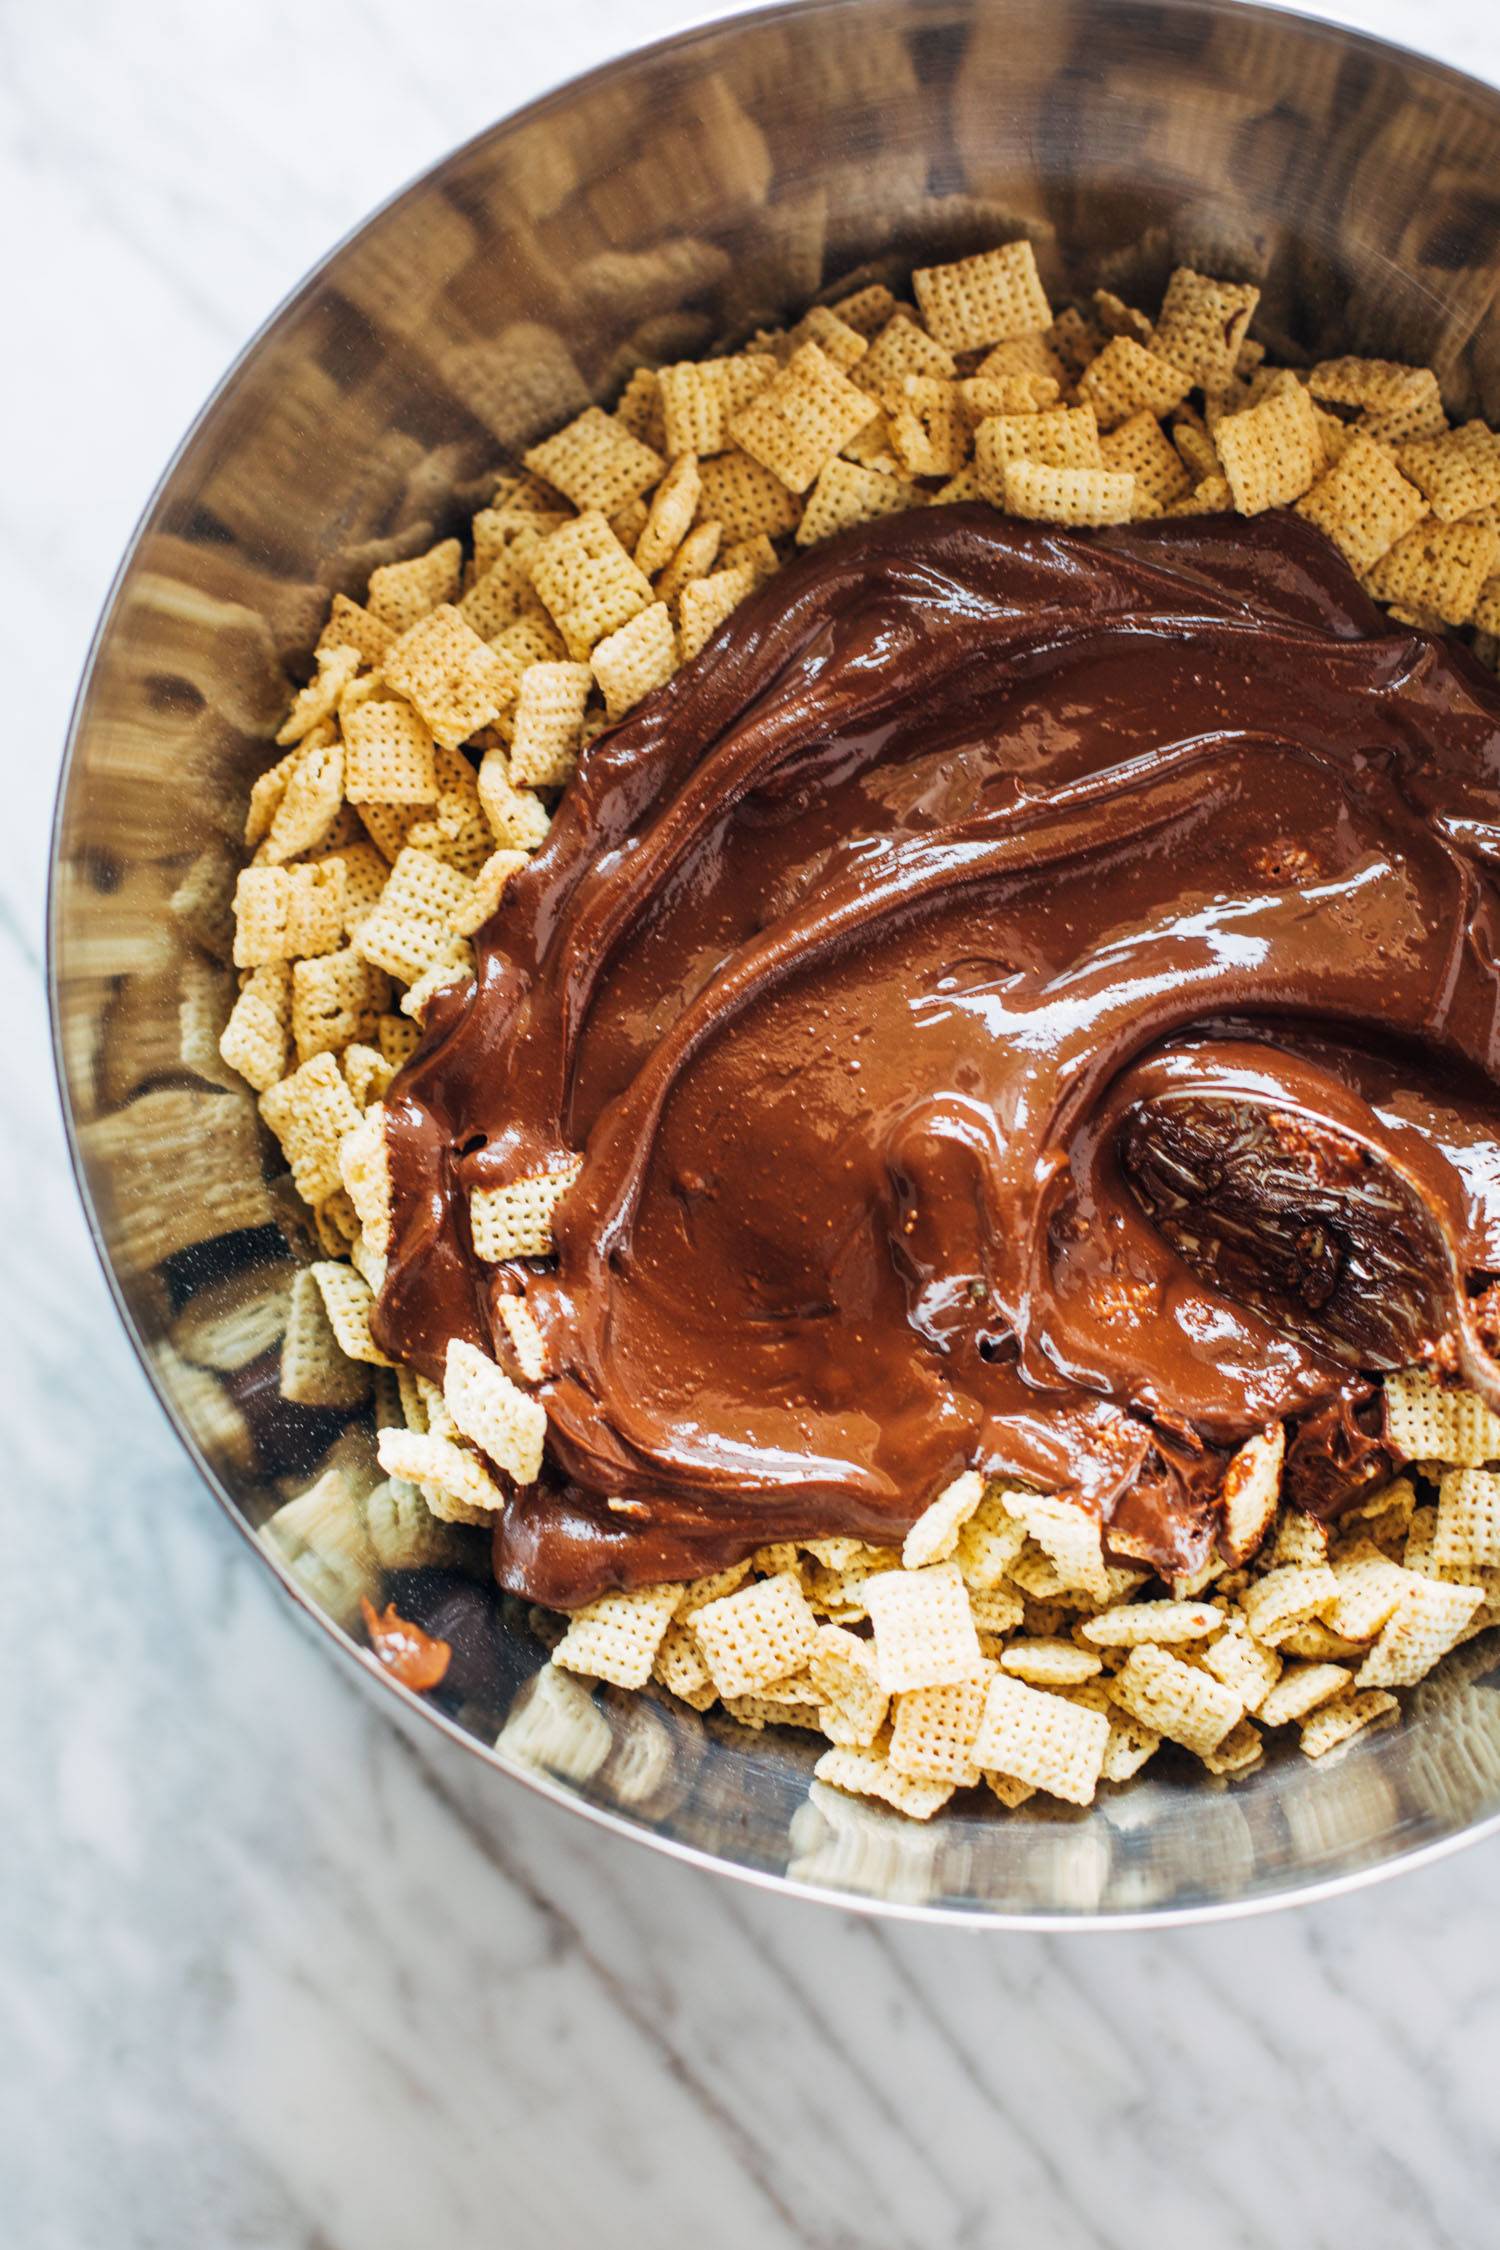 Melted chocolate being mixed into chex mix in a bowl.